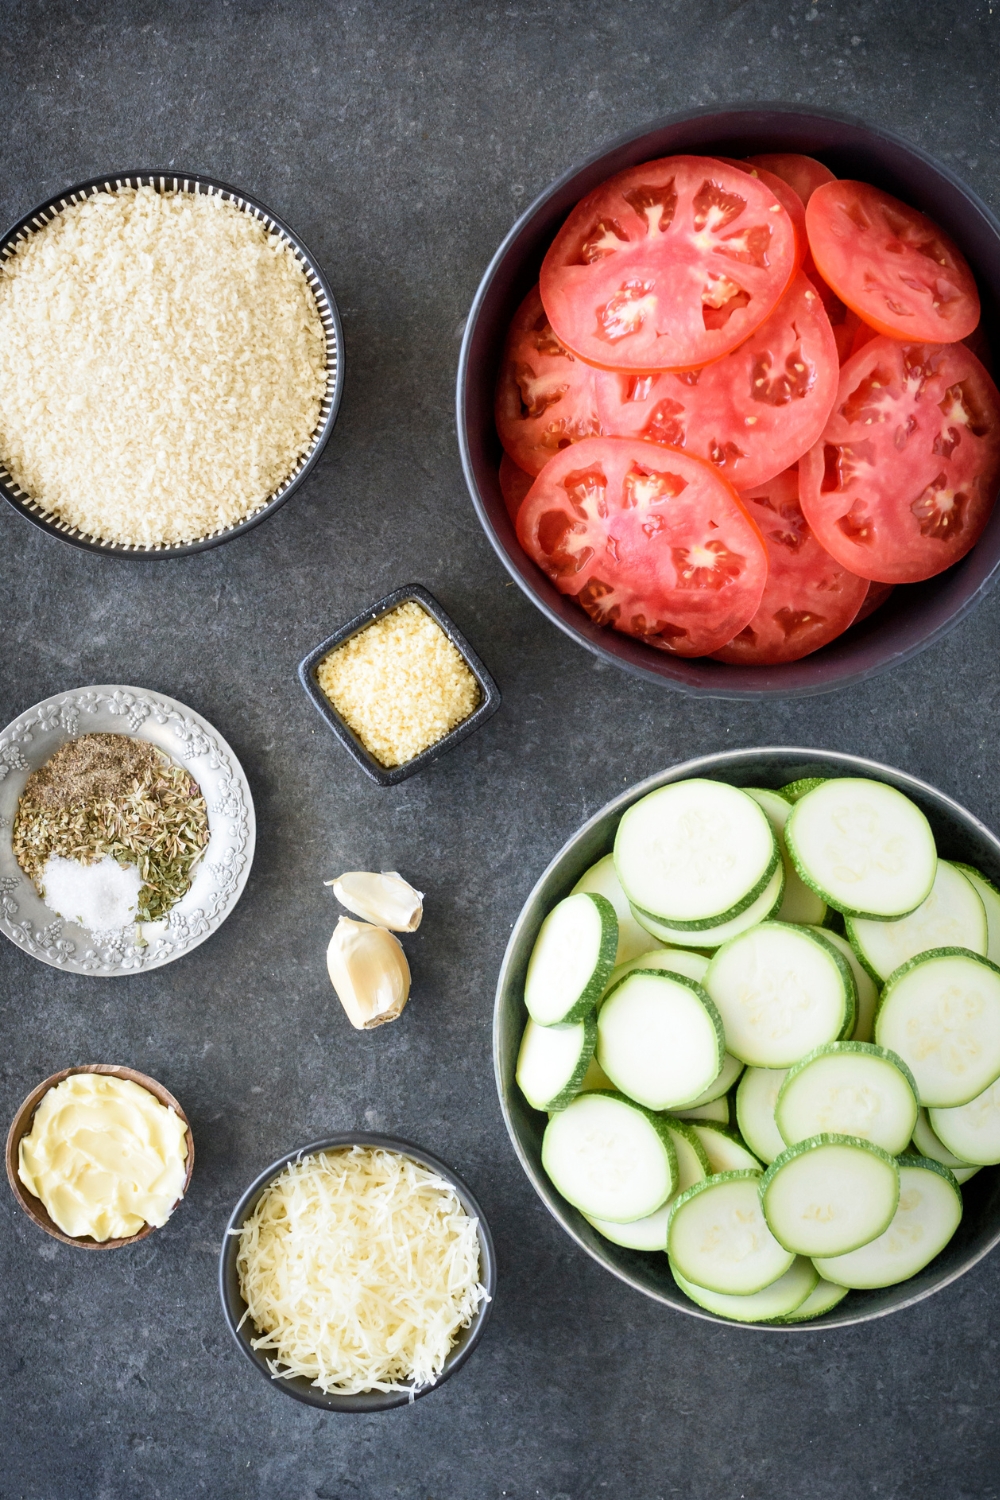 A countertop with sliced tomatoes, sliced zucchini, shredded cheese, butter, garlic, herbs, and seasonings in various bowls.